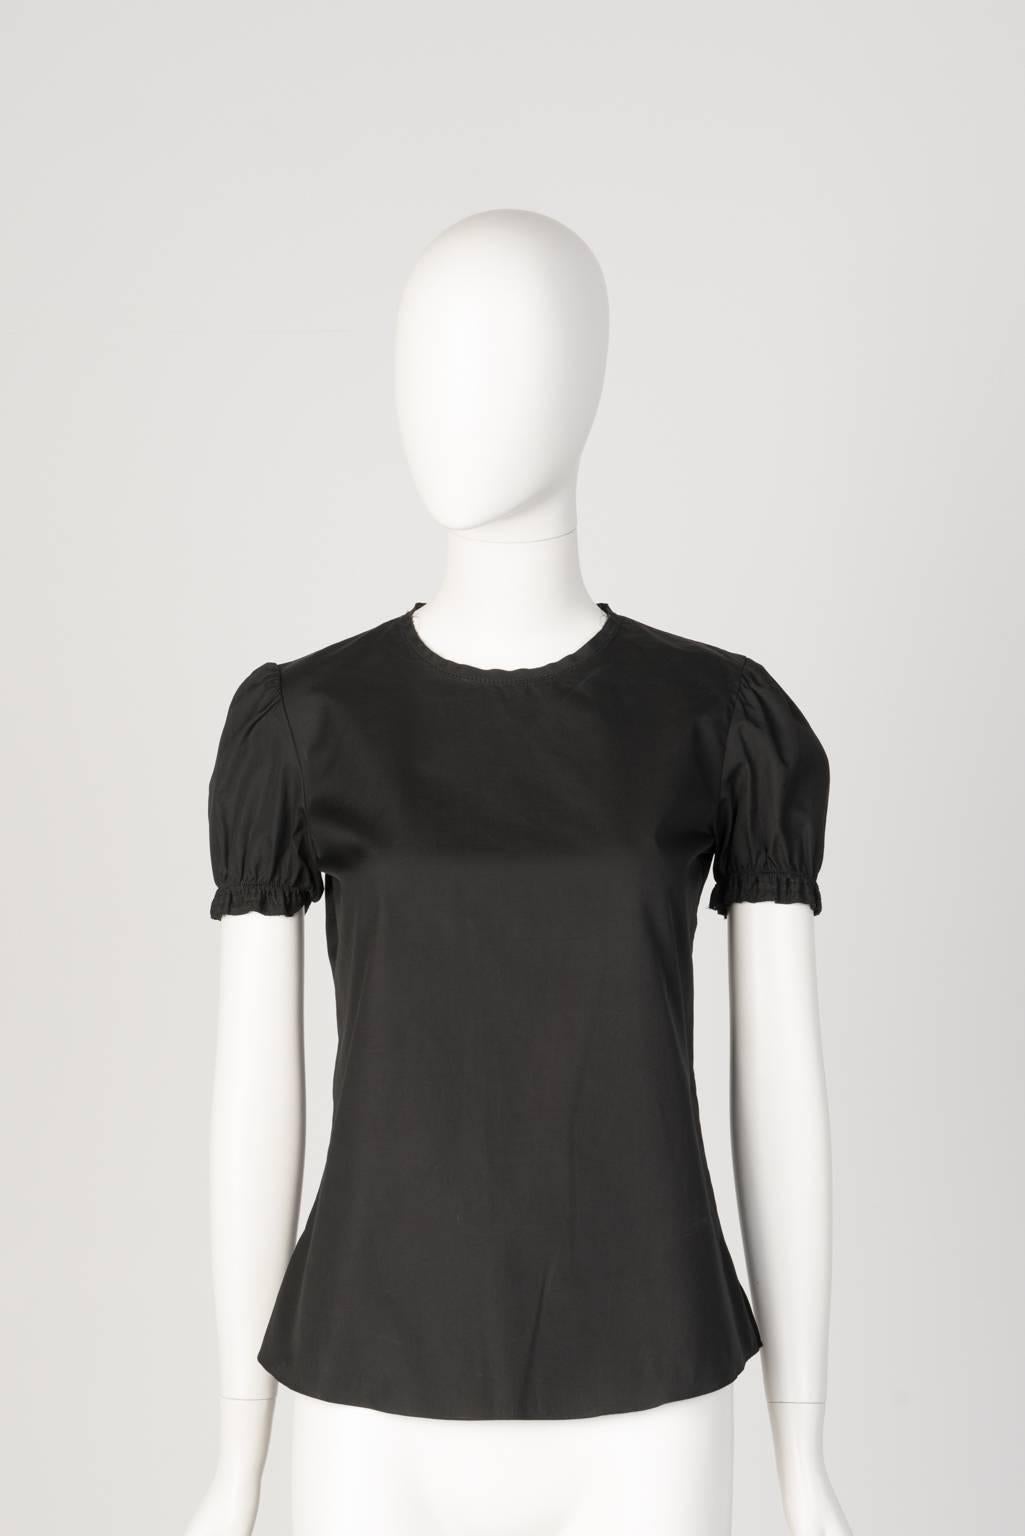 Black cotton blouse with gathered cap sleeves, slit sides and button closure at back of neck